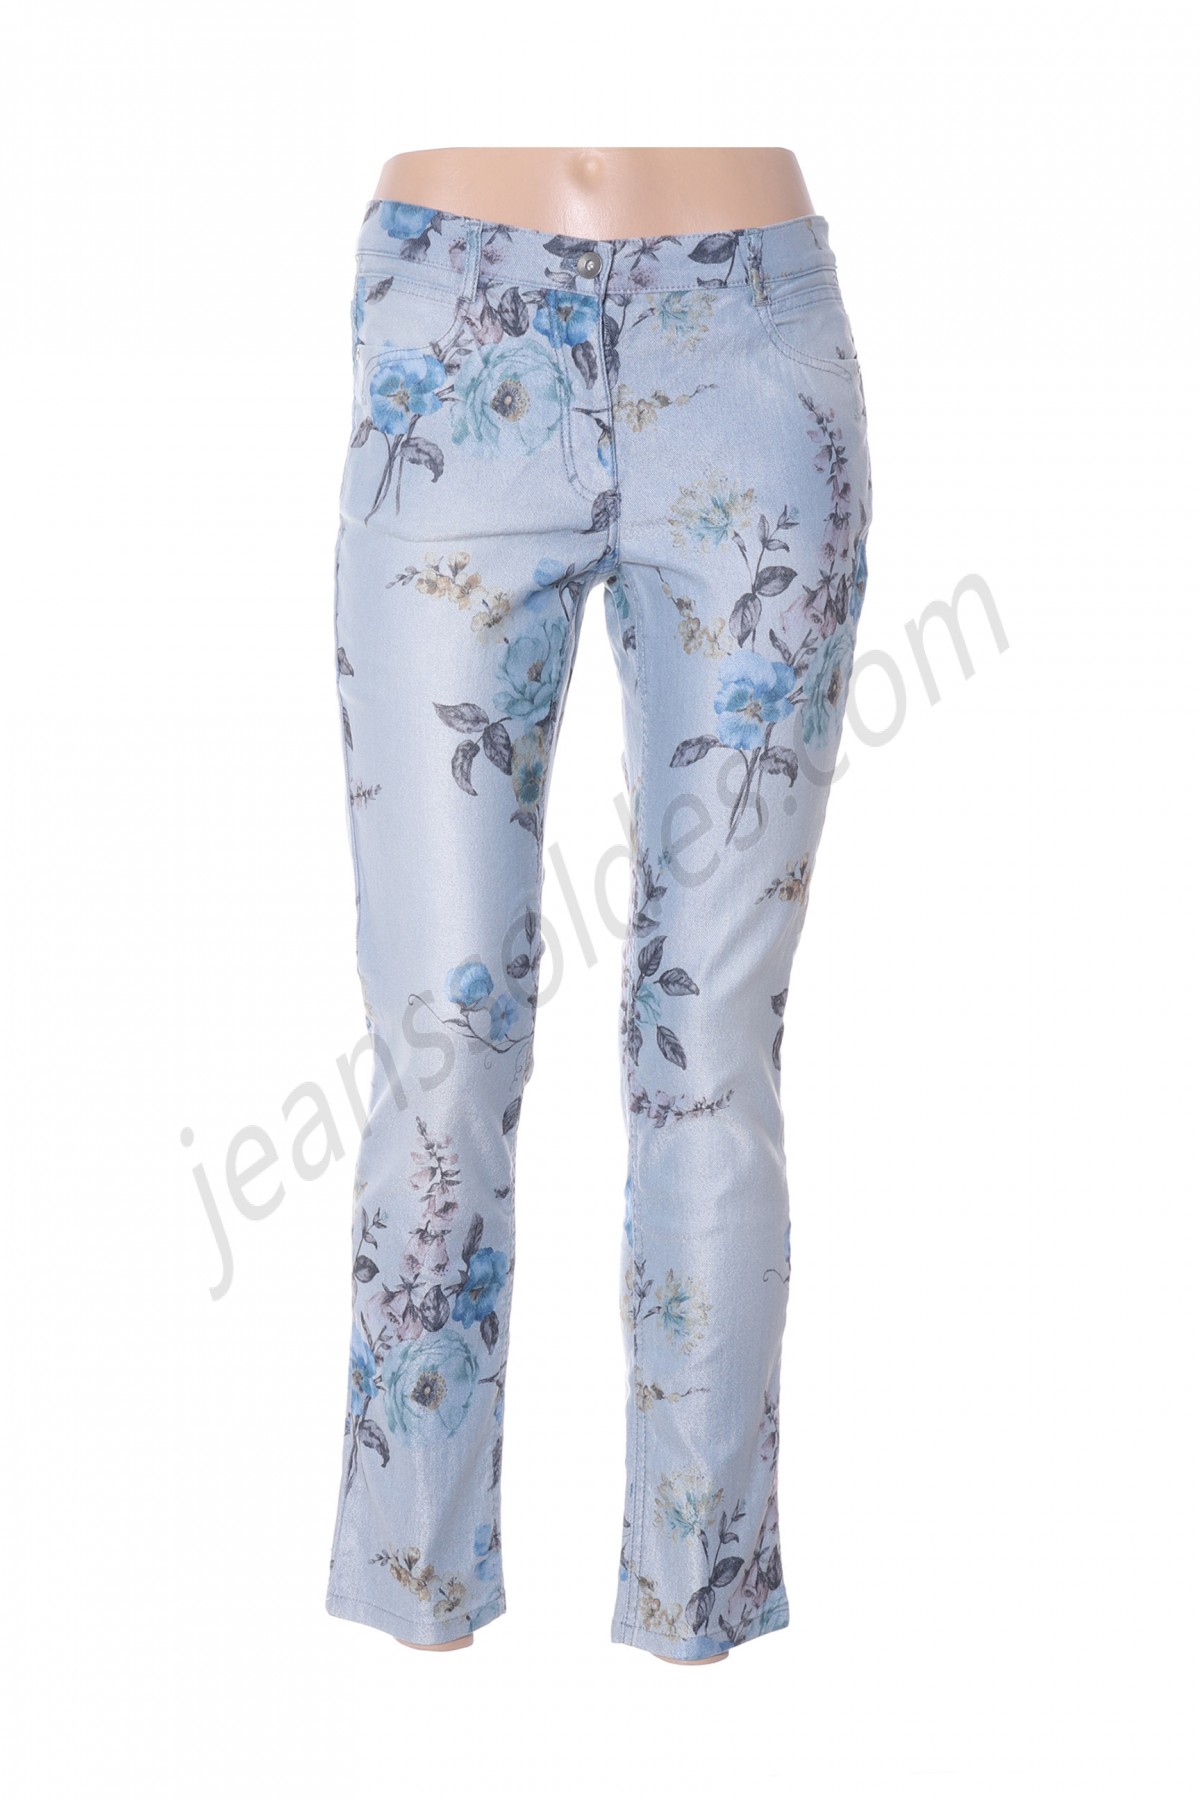 betty barclay-Jeans coupe slim prix d’amis - -0